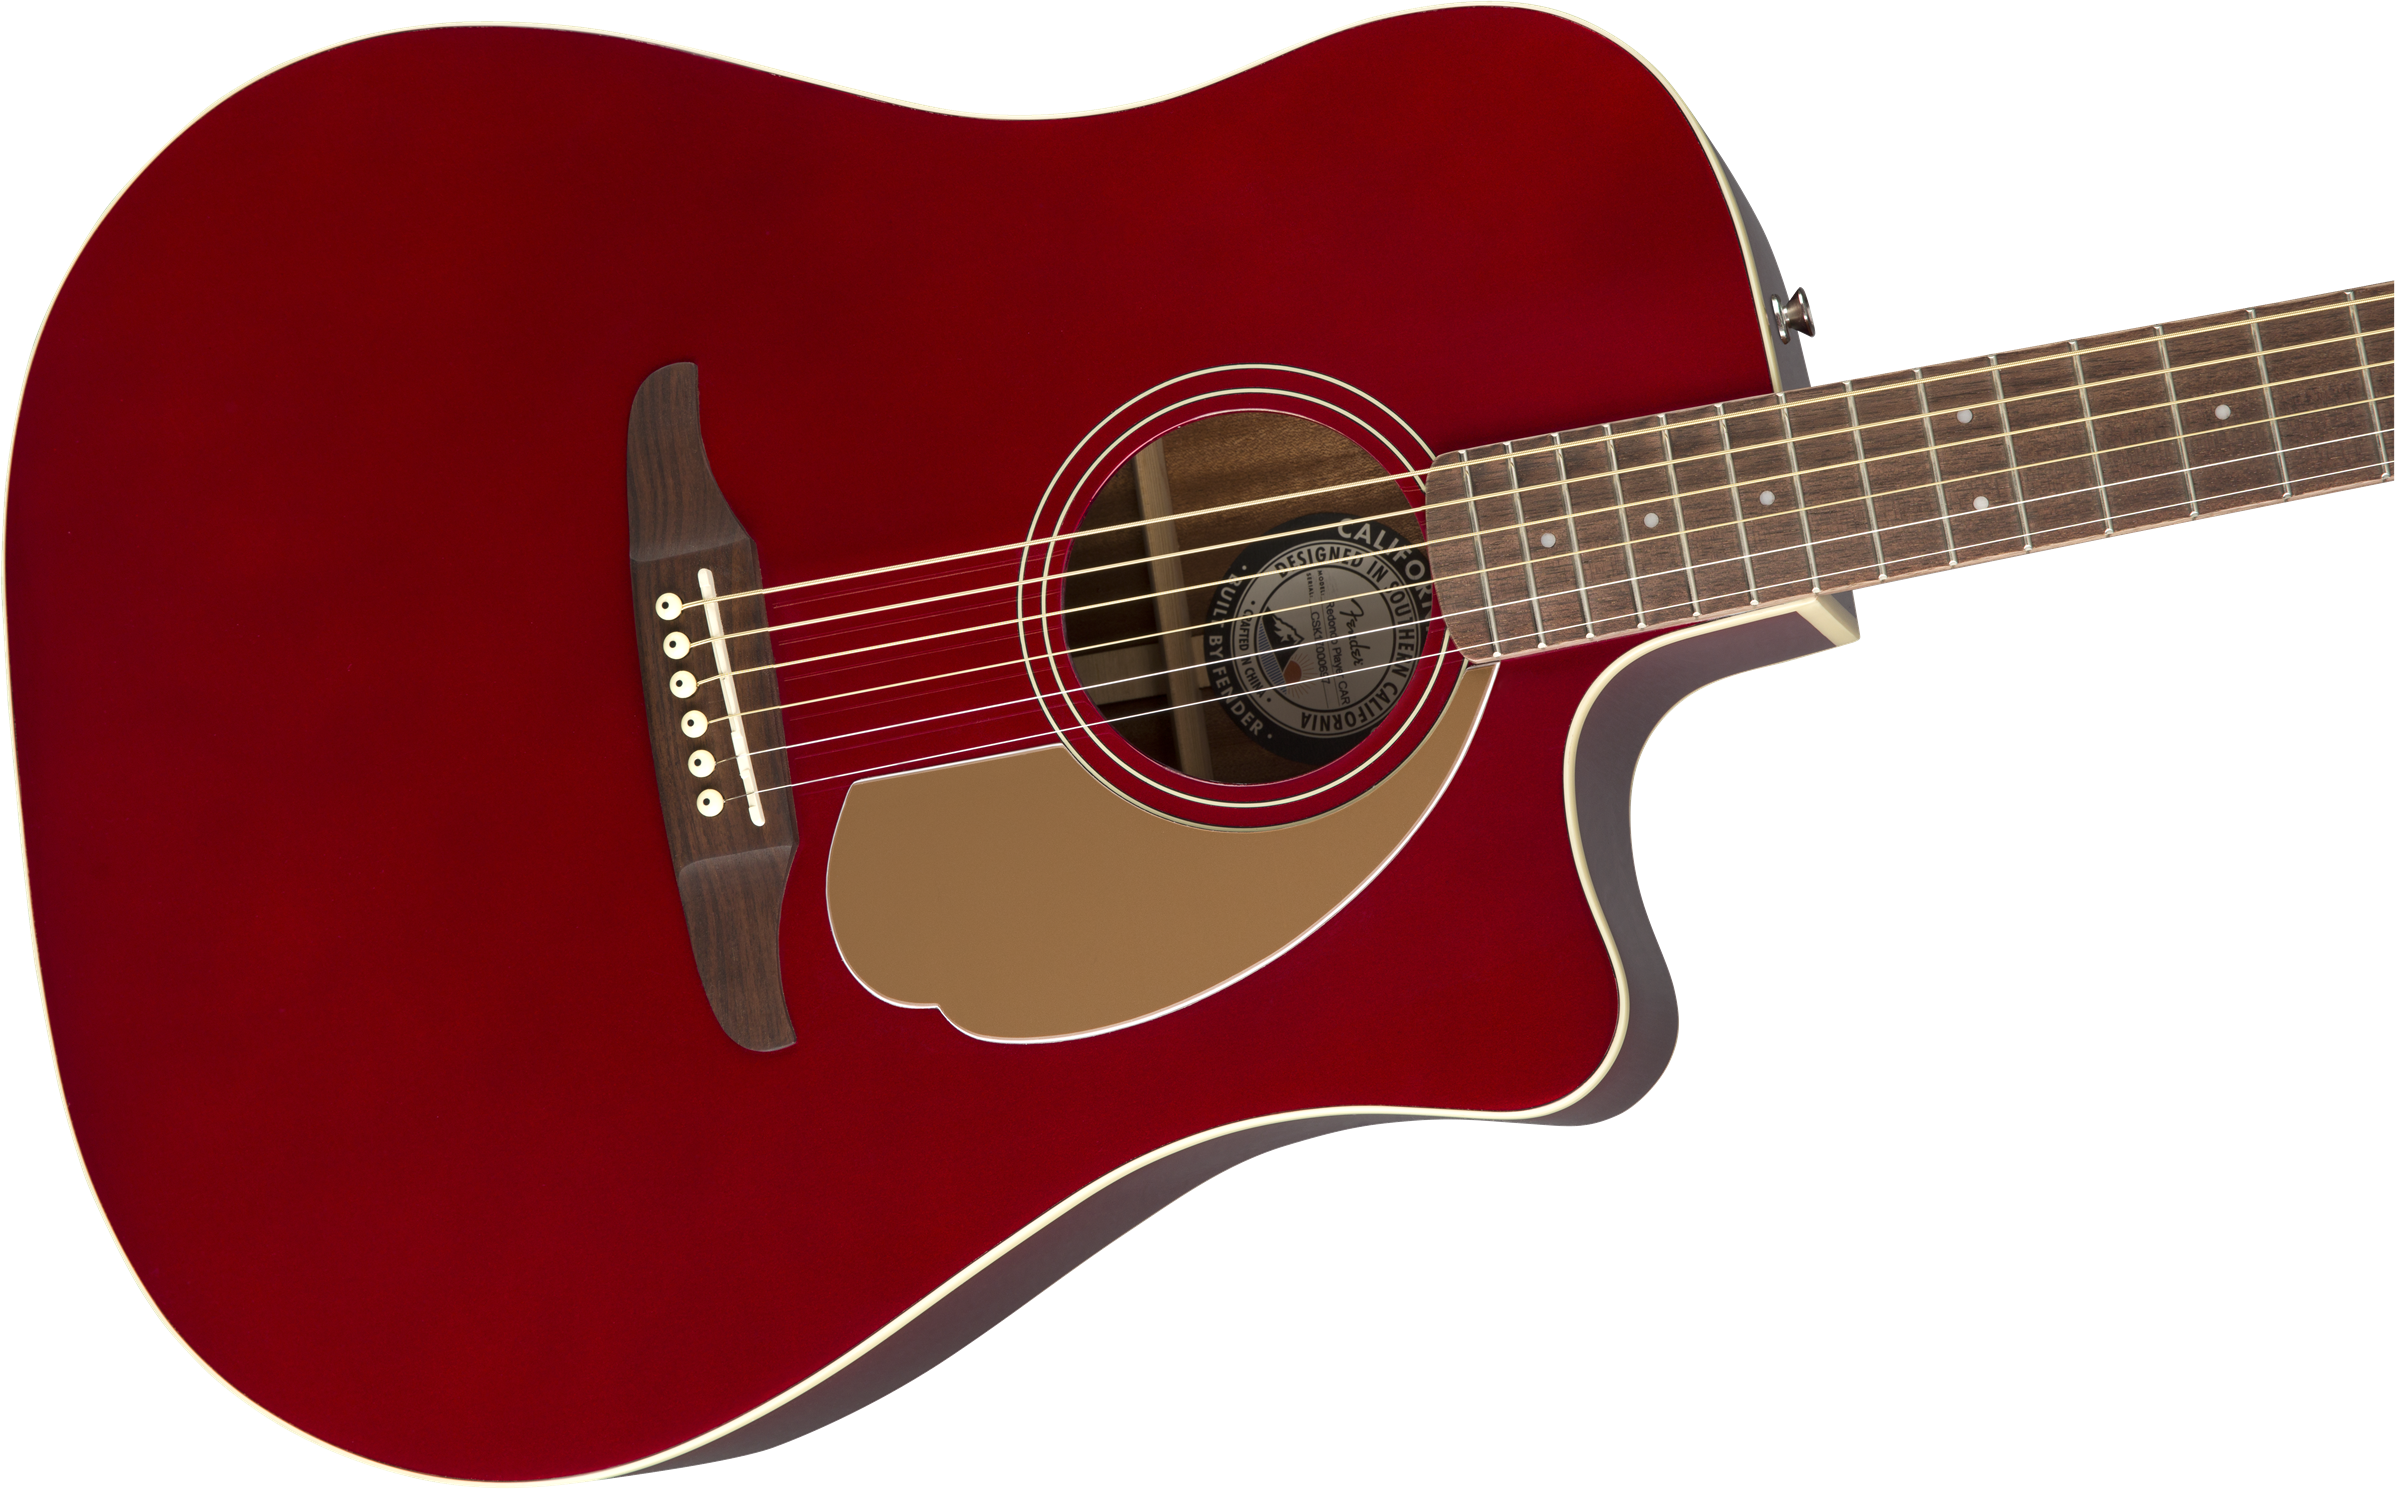 Fender Redondo Player - Candy Apple Red - Acoustic guitar & electro - Variation 2